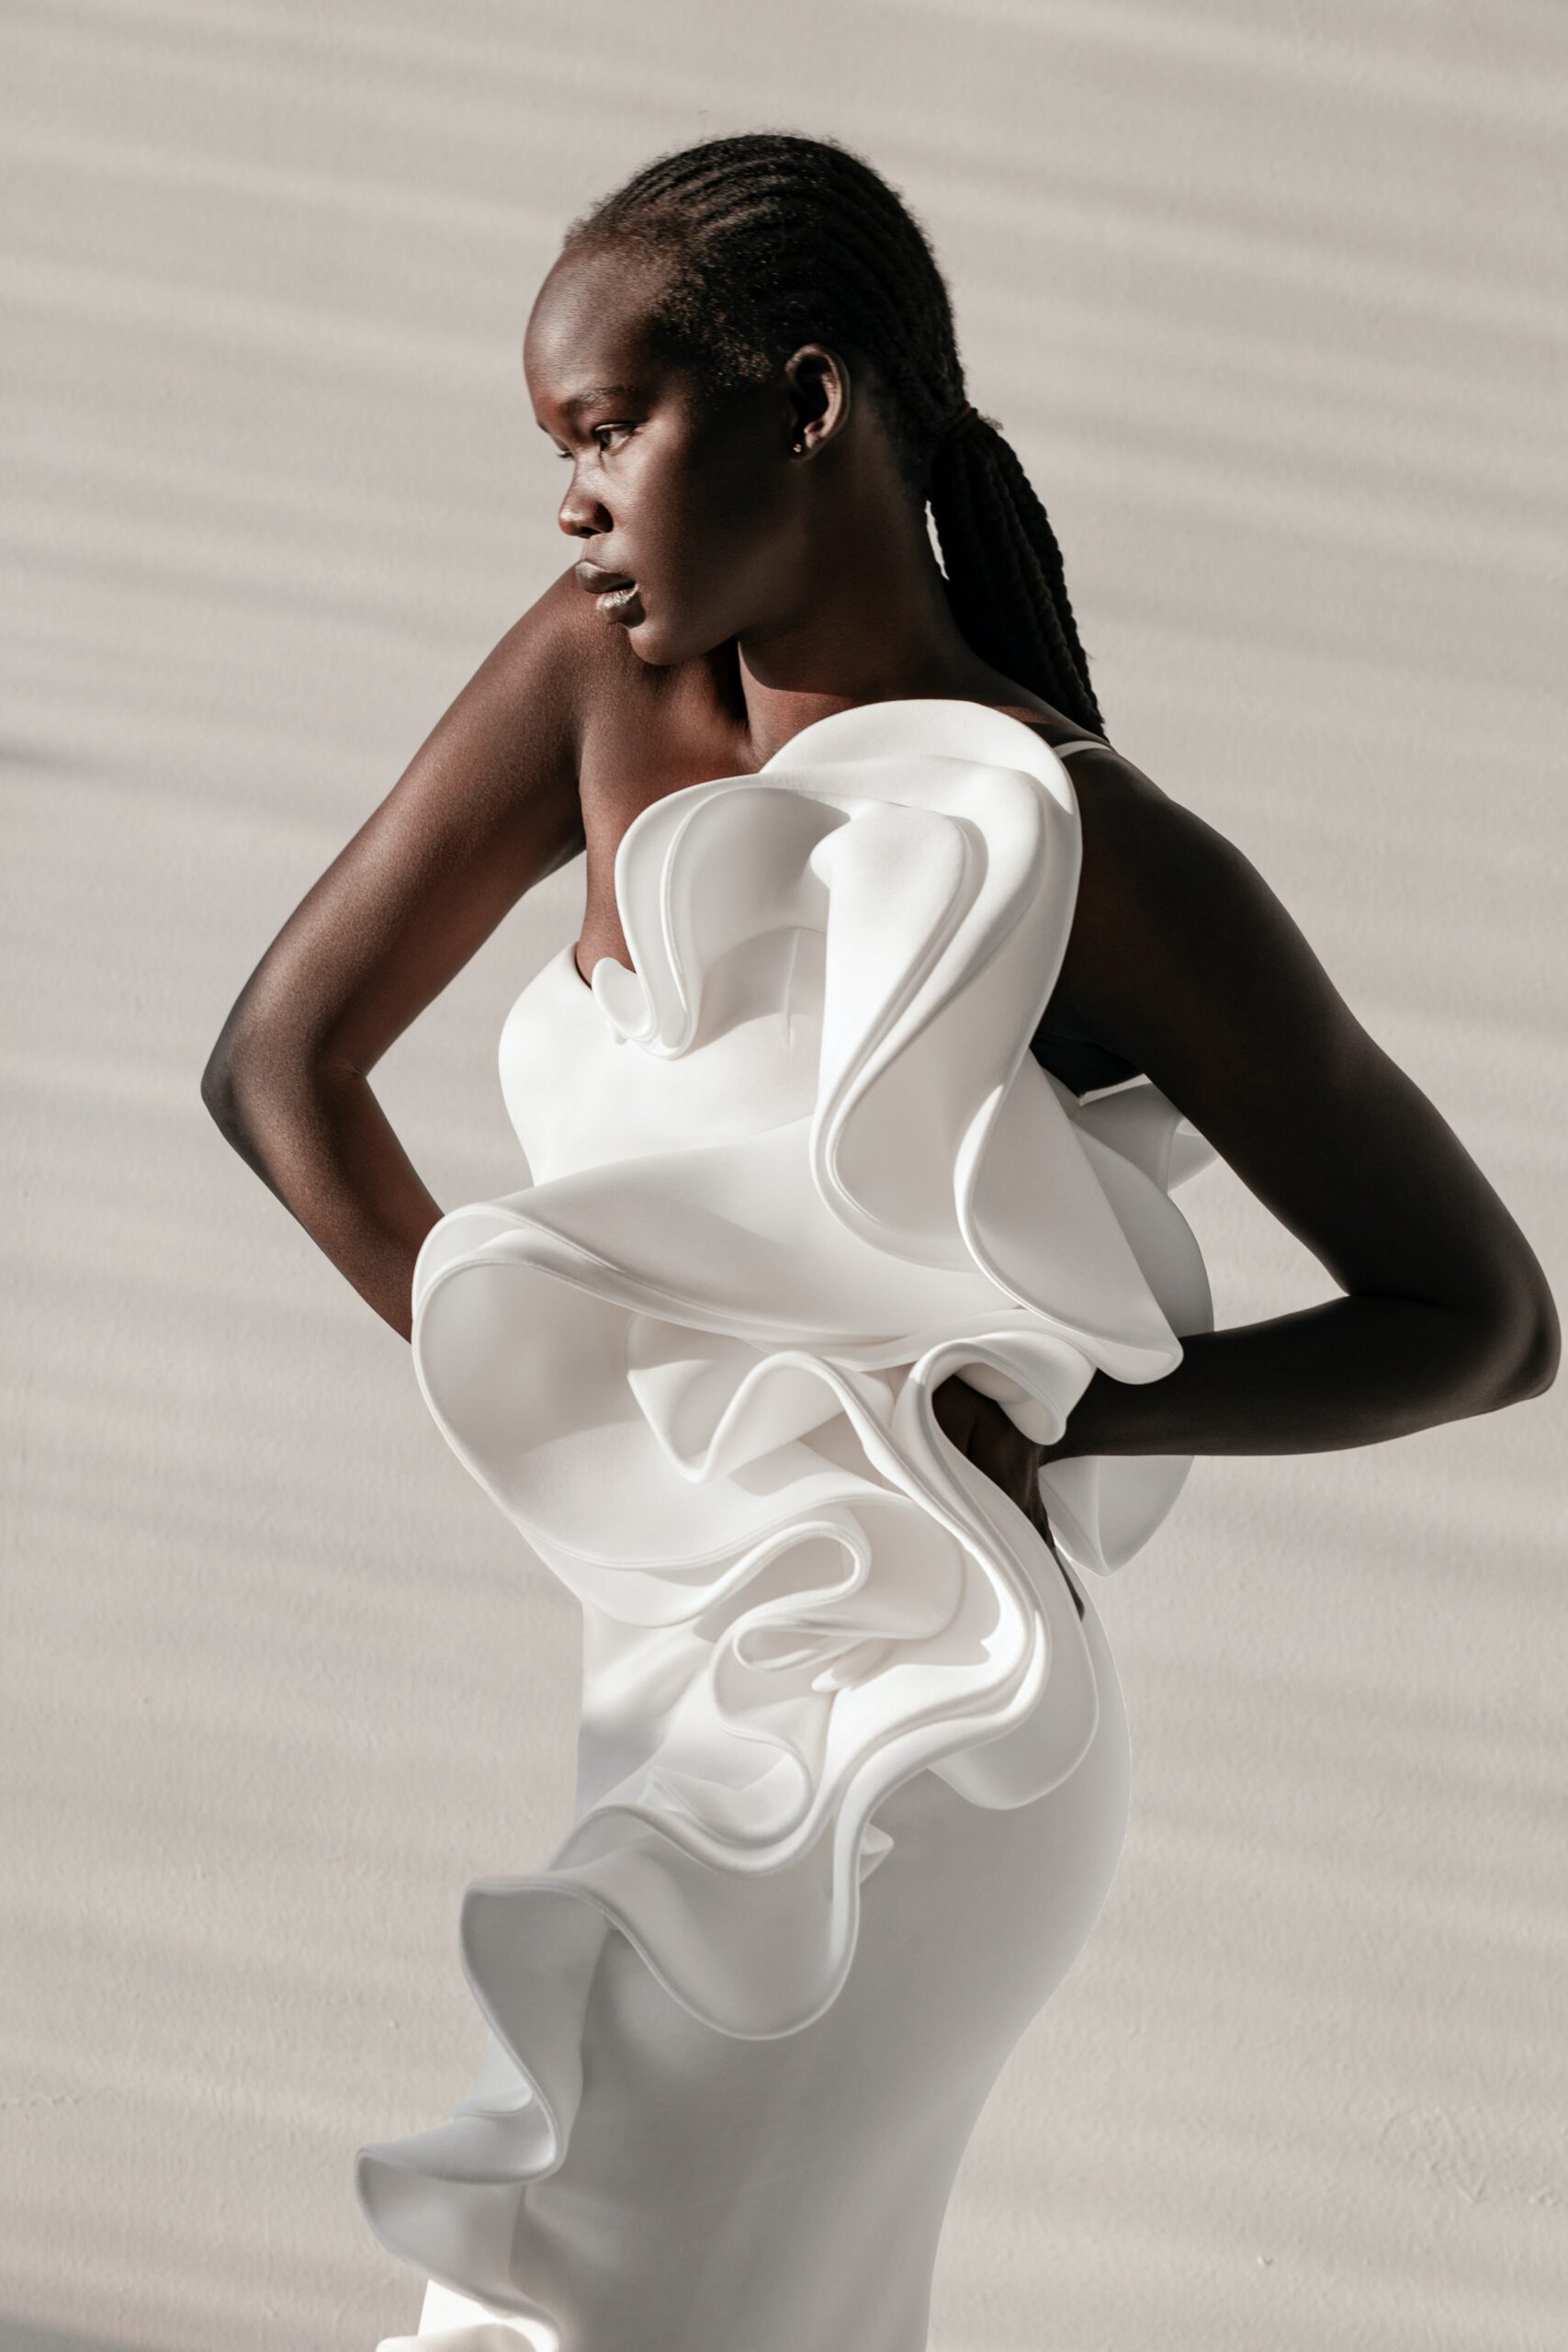 Afro-American female model in a white dress with ruffles